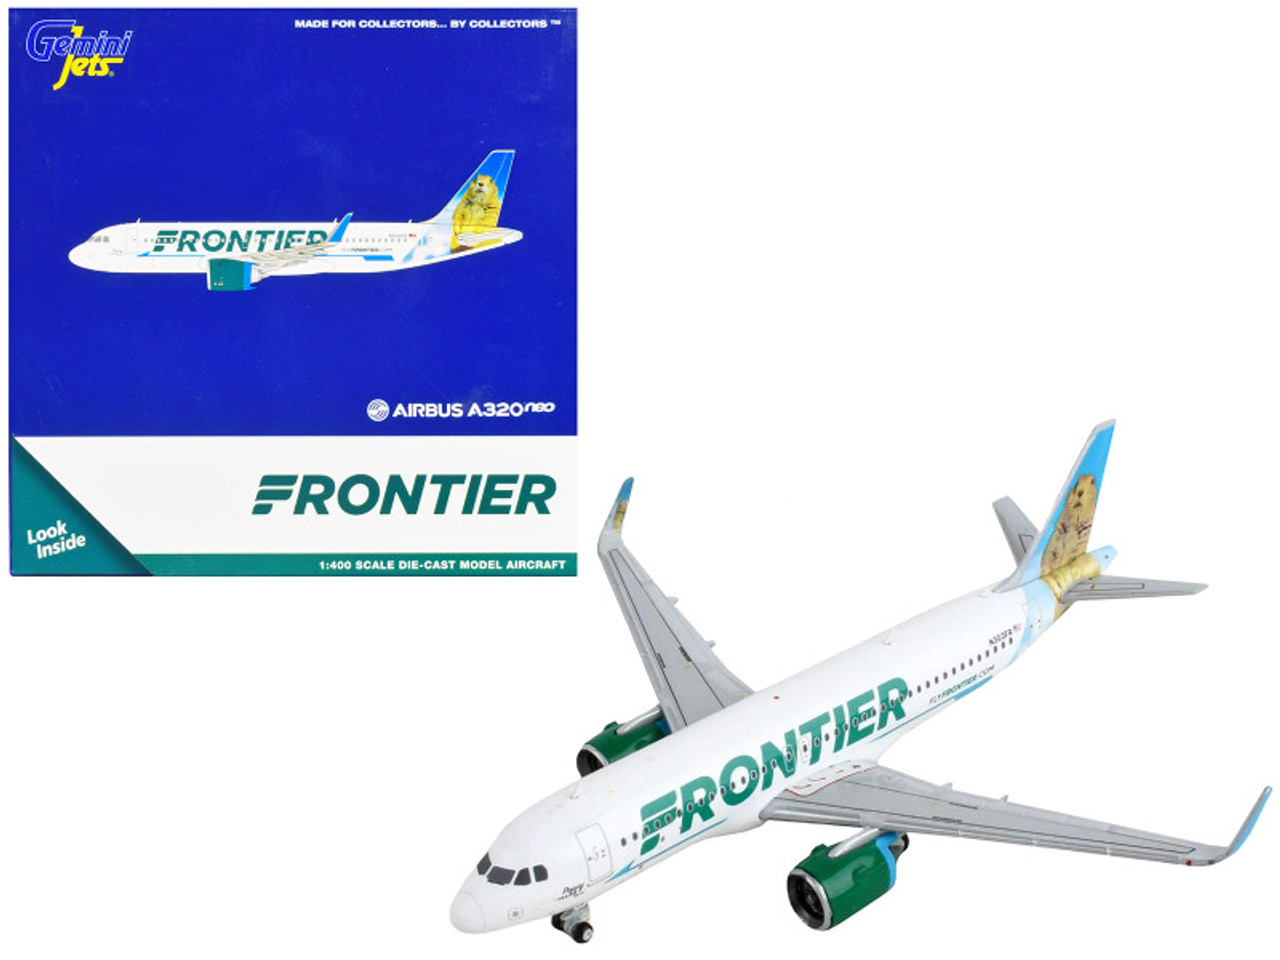 Airbus A320neo Commercial Aircraft "Frontier Airlines - Poppy the Prarie Dog" White with Graphics 1/400 Diecast Model Airplane by GeminiJets